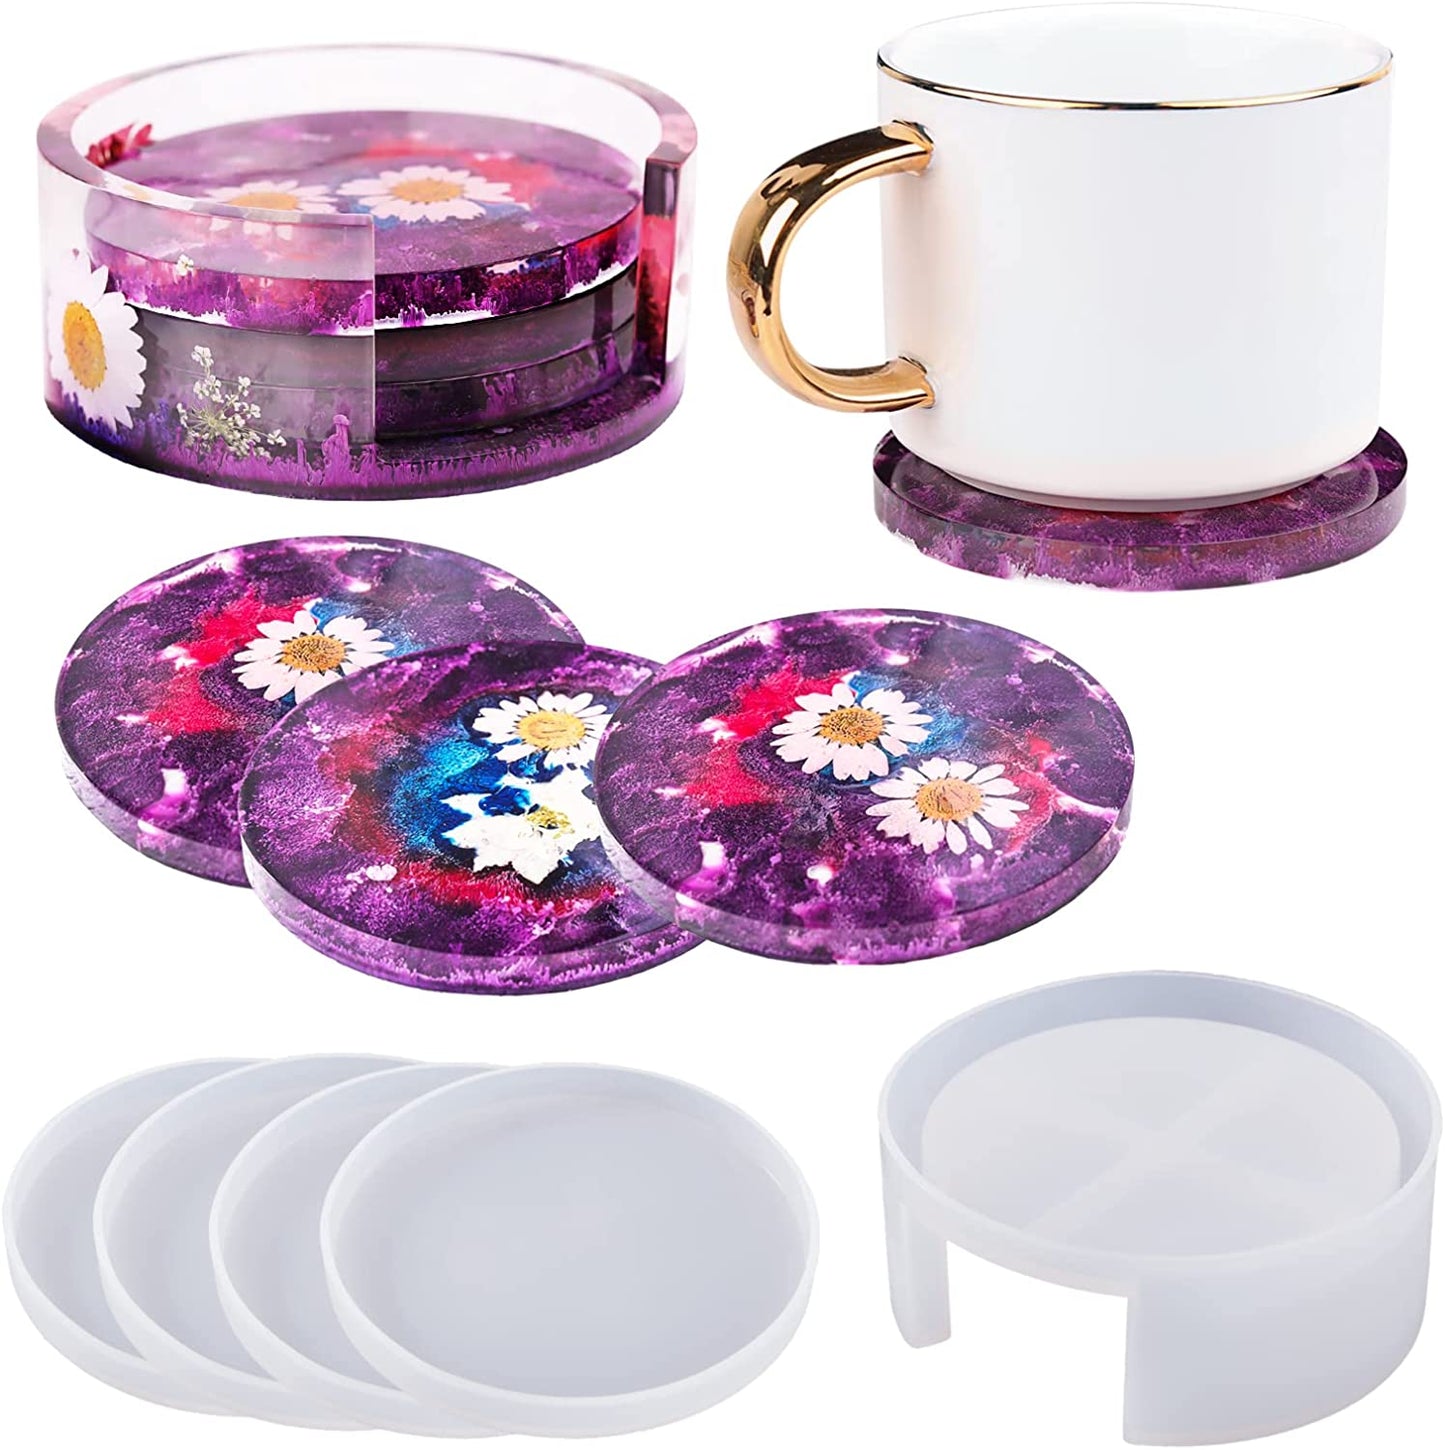 Resin Coaster Mold Making Coasters Kit Silicone Resin Mold Jewelry